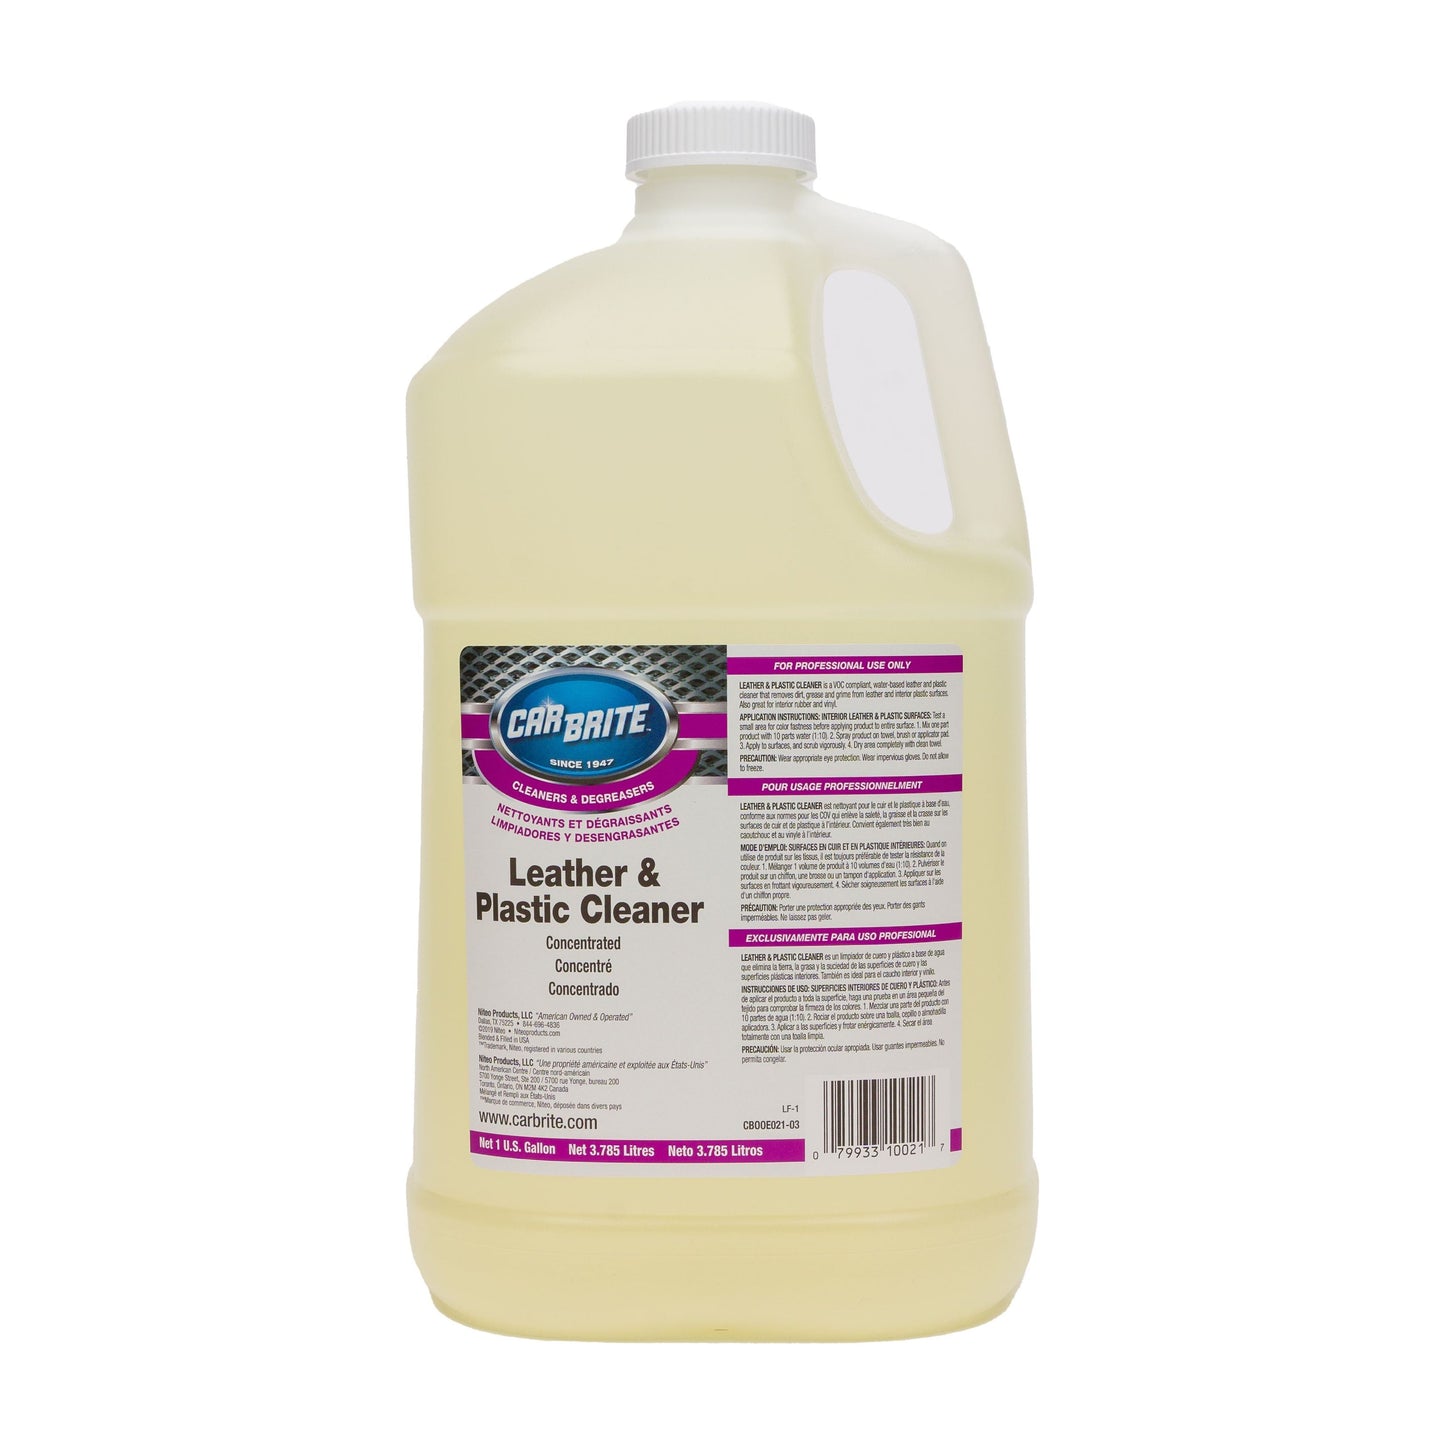 CarBrite Leather and Plastic Cleaner